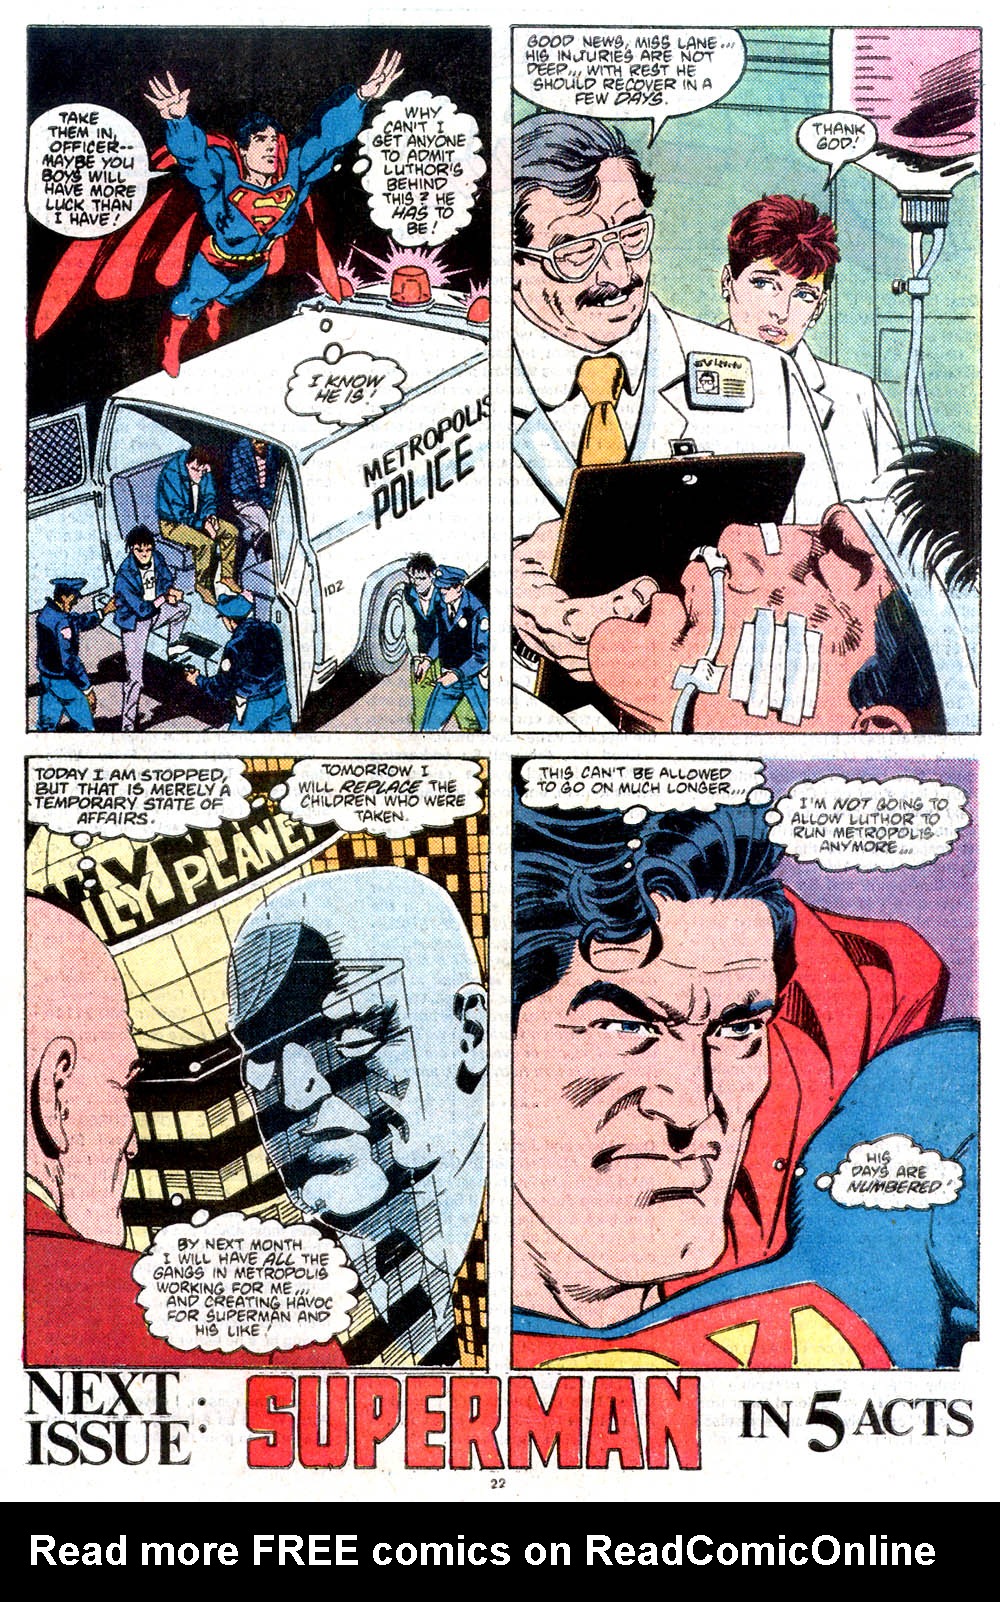 Adventures of Superman (1987) 432 Page 22